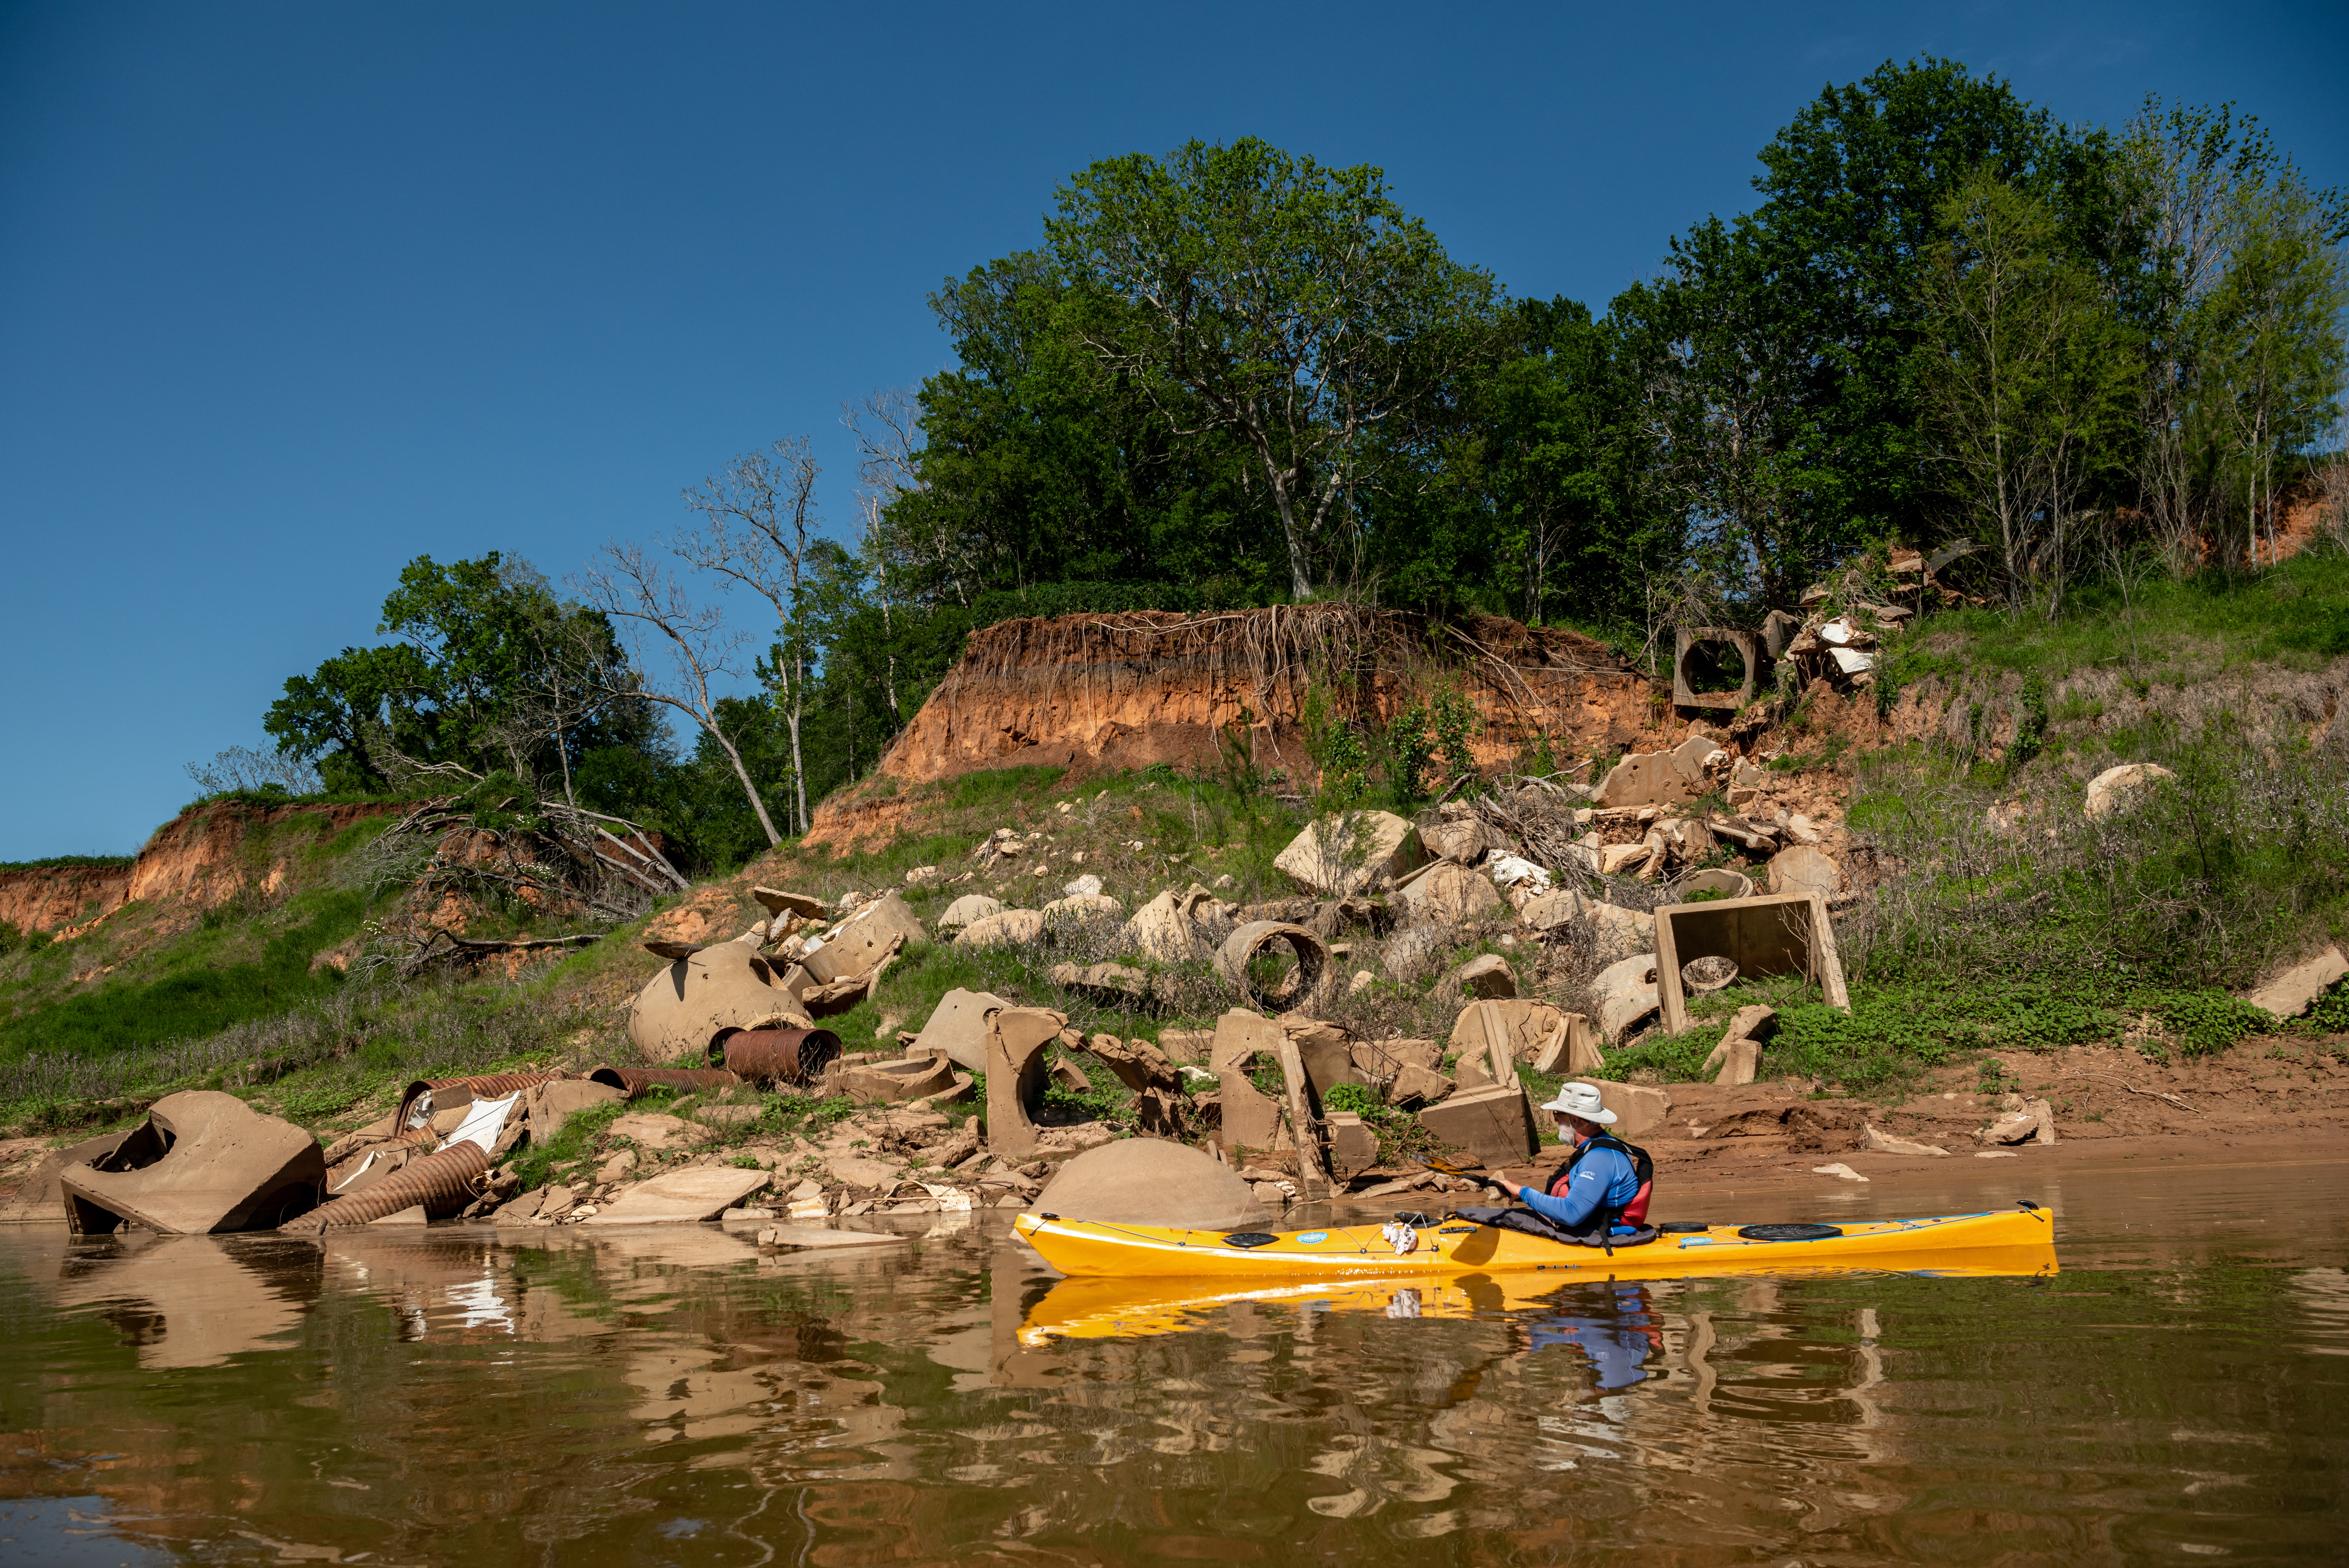 Bruce Bodsn, a man in an outdoor hat and blue parka and red safety vest, navigates a yellow kayak next to a heap of assorted cement refuse lying on a hillside by the Brazos River, under the roots of trees visible along an eroded embankment.